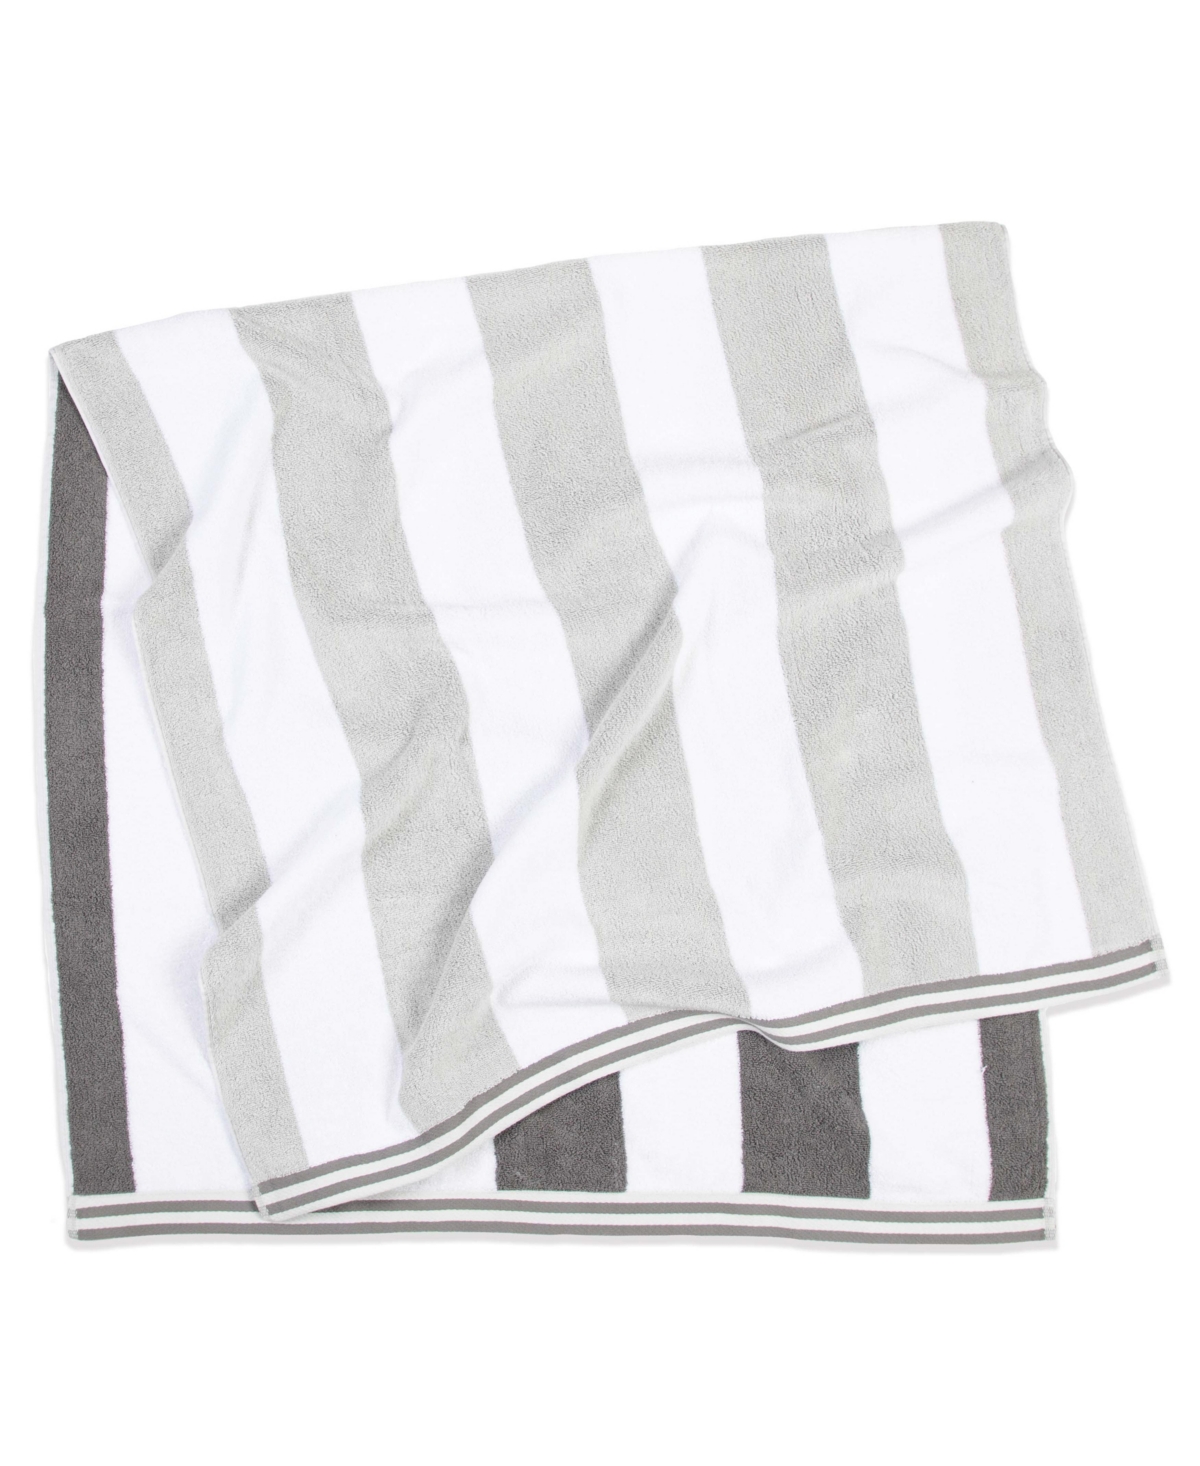 Aston And Arden Reversible Luxury Beach Towel (35x70 In., 600 Gsm), Striped Color Options, Oversized, Thick, Soft Ri In Light Grey/dark Grey